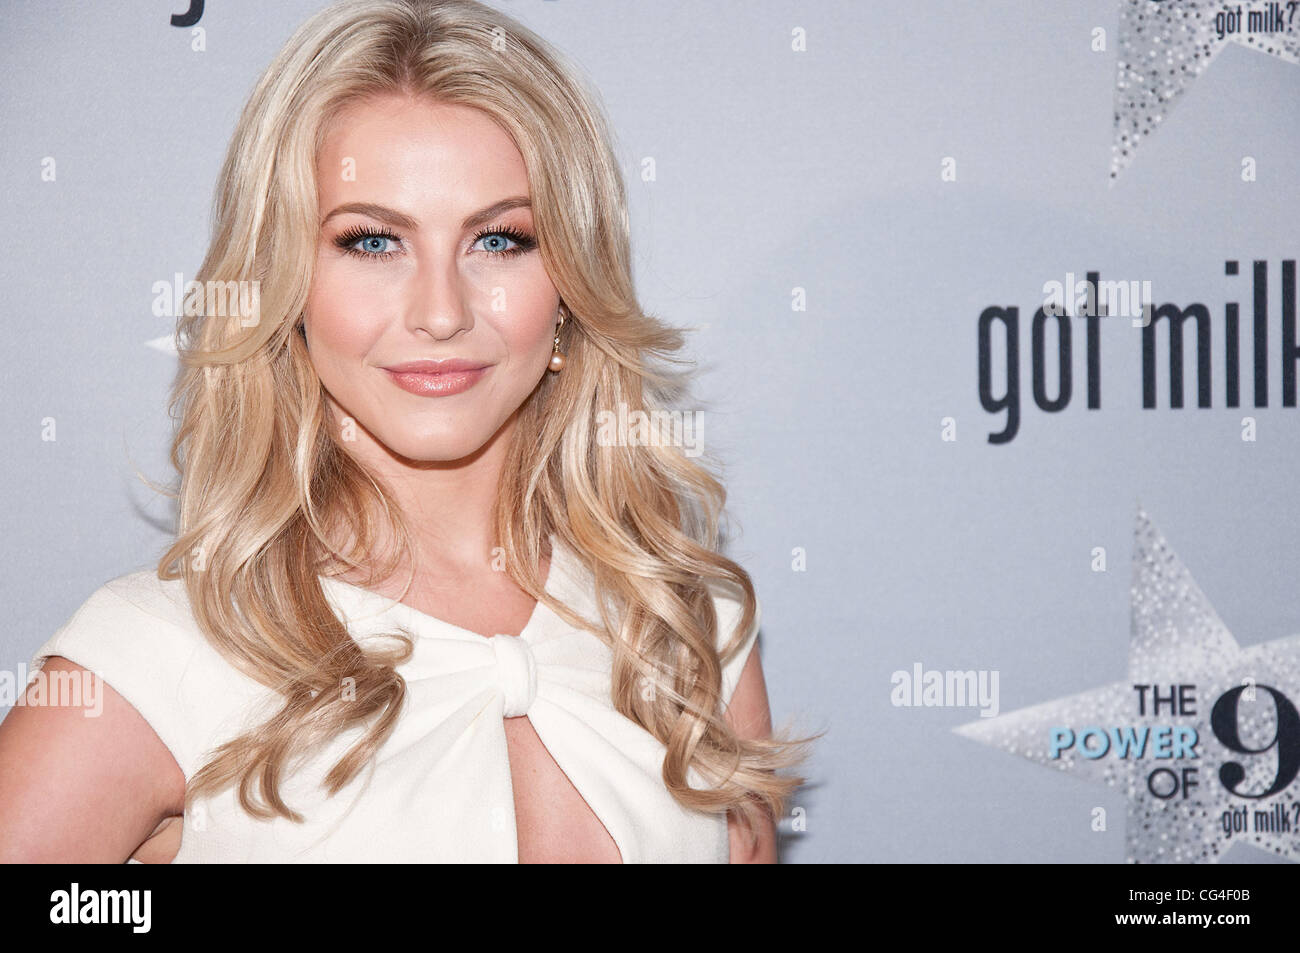 Julianne Hough unveiling of the new 'got milk?' ad campaign at Hearst Tower. New York City, USA - 01.02.11 Stock Photo